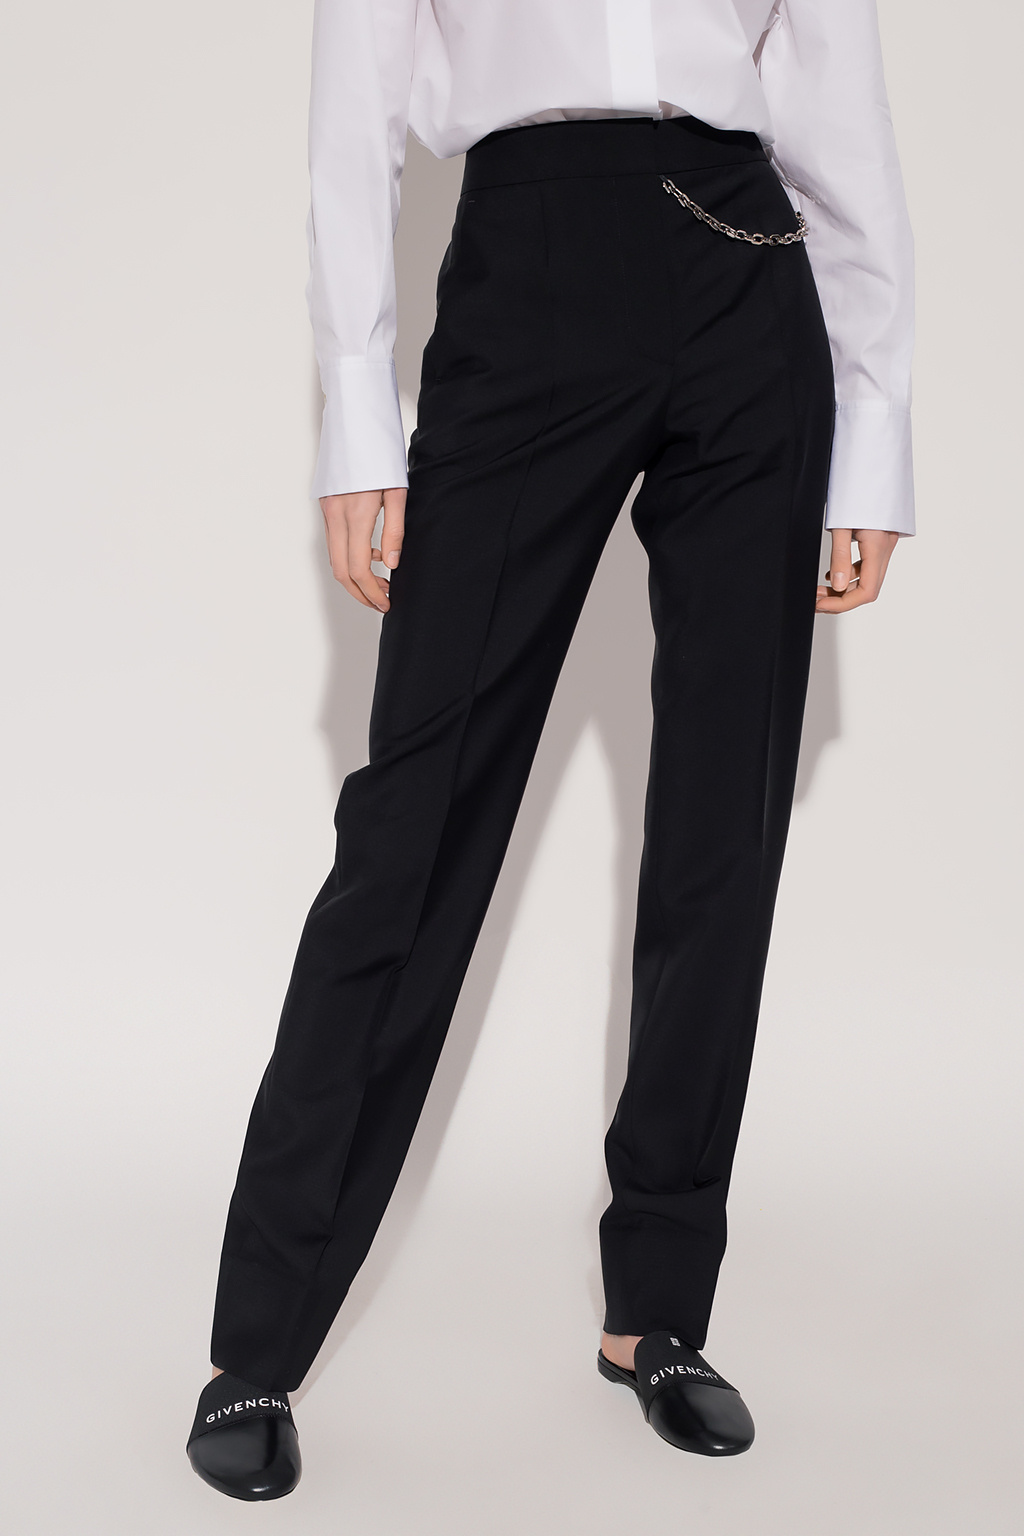 Givenchy Pleat-front print trousers